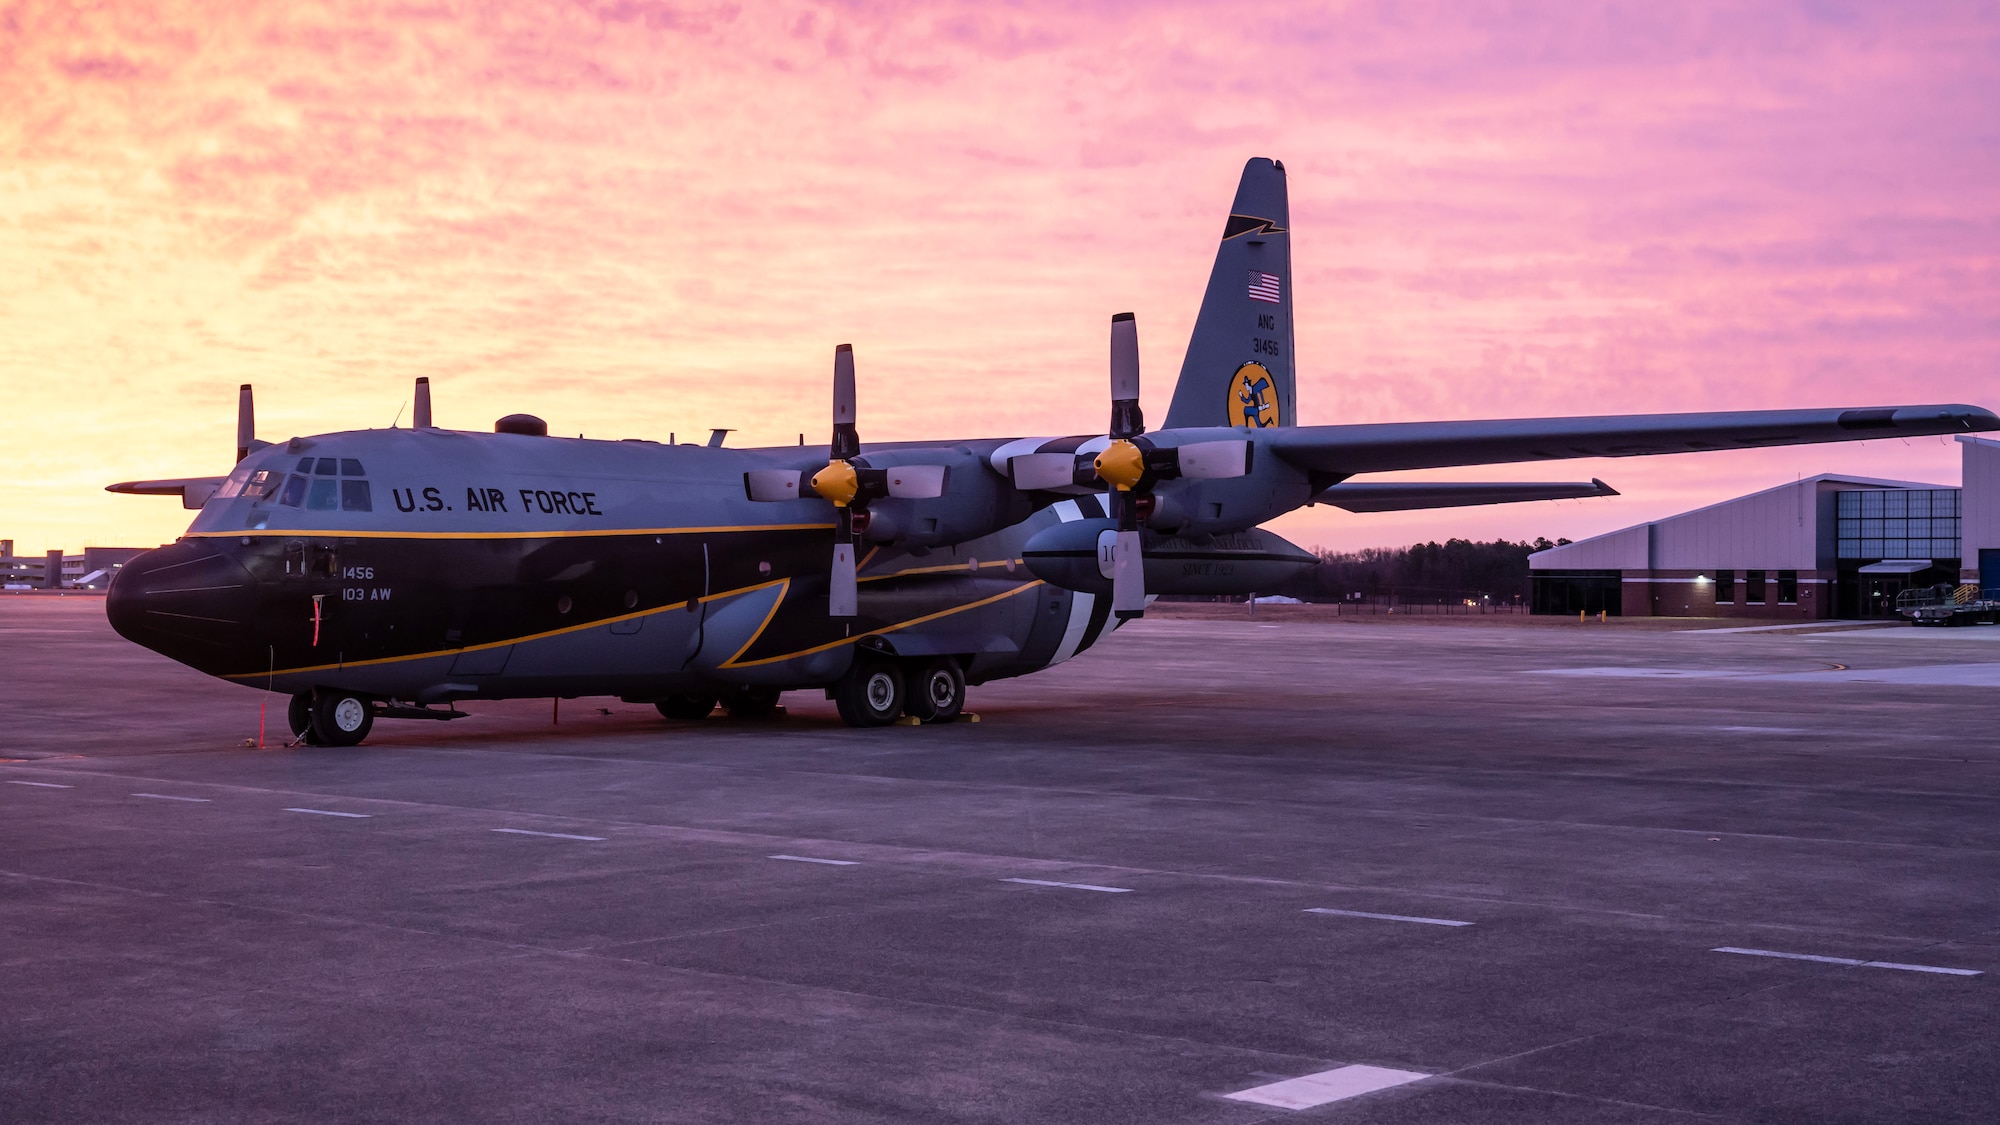 A C-130H aircraft, painted to commemorate the 100th anniversary of the 118th Airlift Squadron, Flying Yankees, sits on the flight line at sunrise, January 18, 2023 at Bradley Air National Guard Base, Conn. Members of the 103rd Maintenance Group, Connecticut Air National Guard painted the aircraft. (U.S. Air National Guard photo by Master Sgt. Tamara R. Dabney)